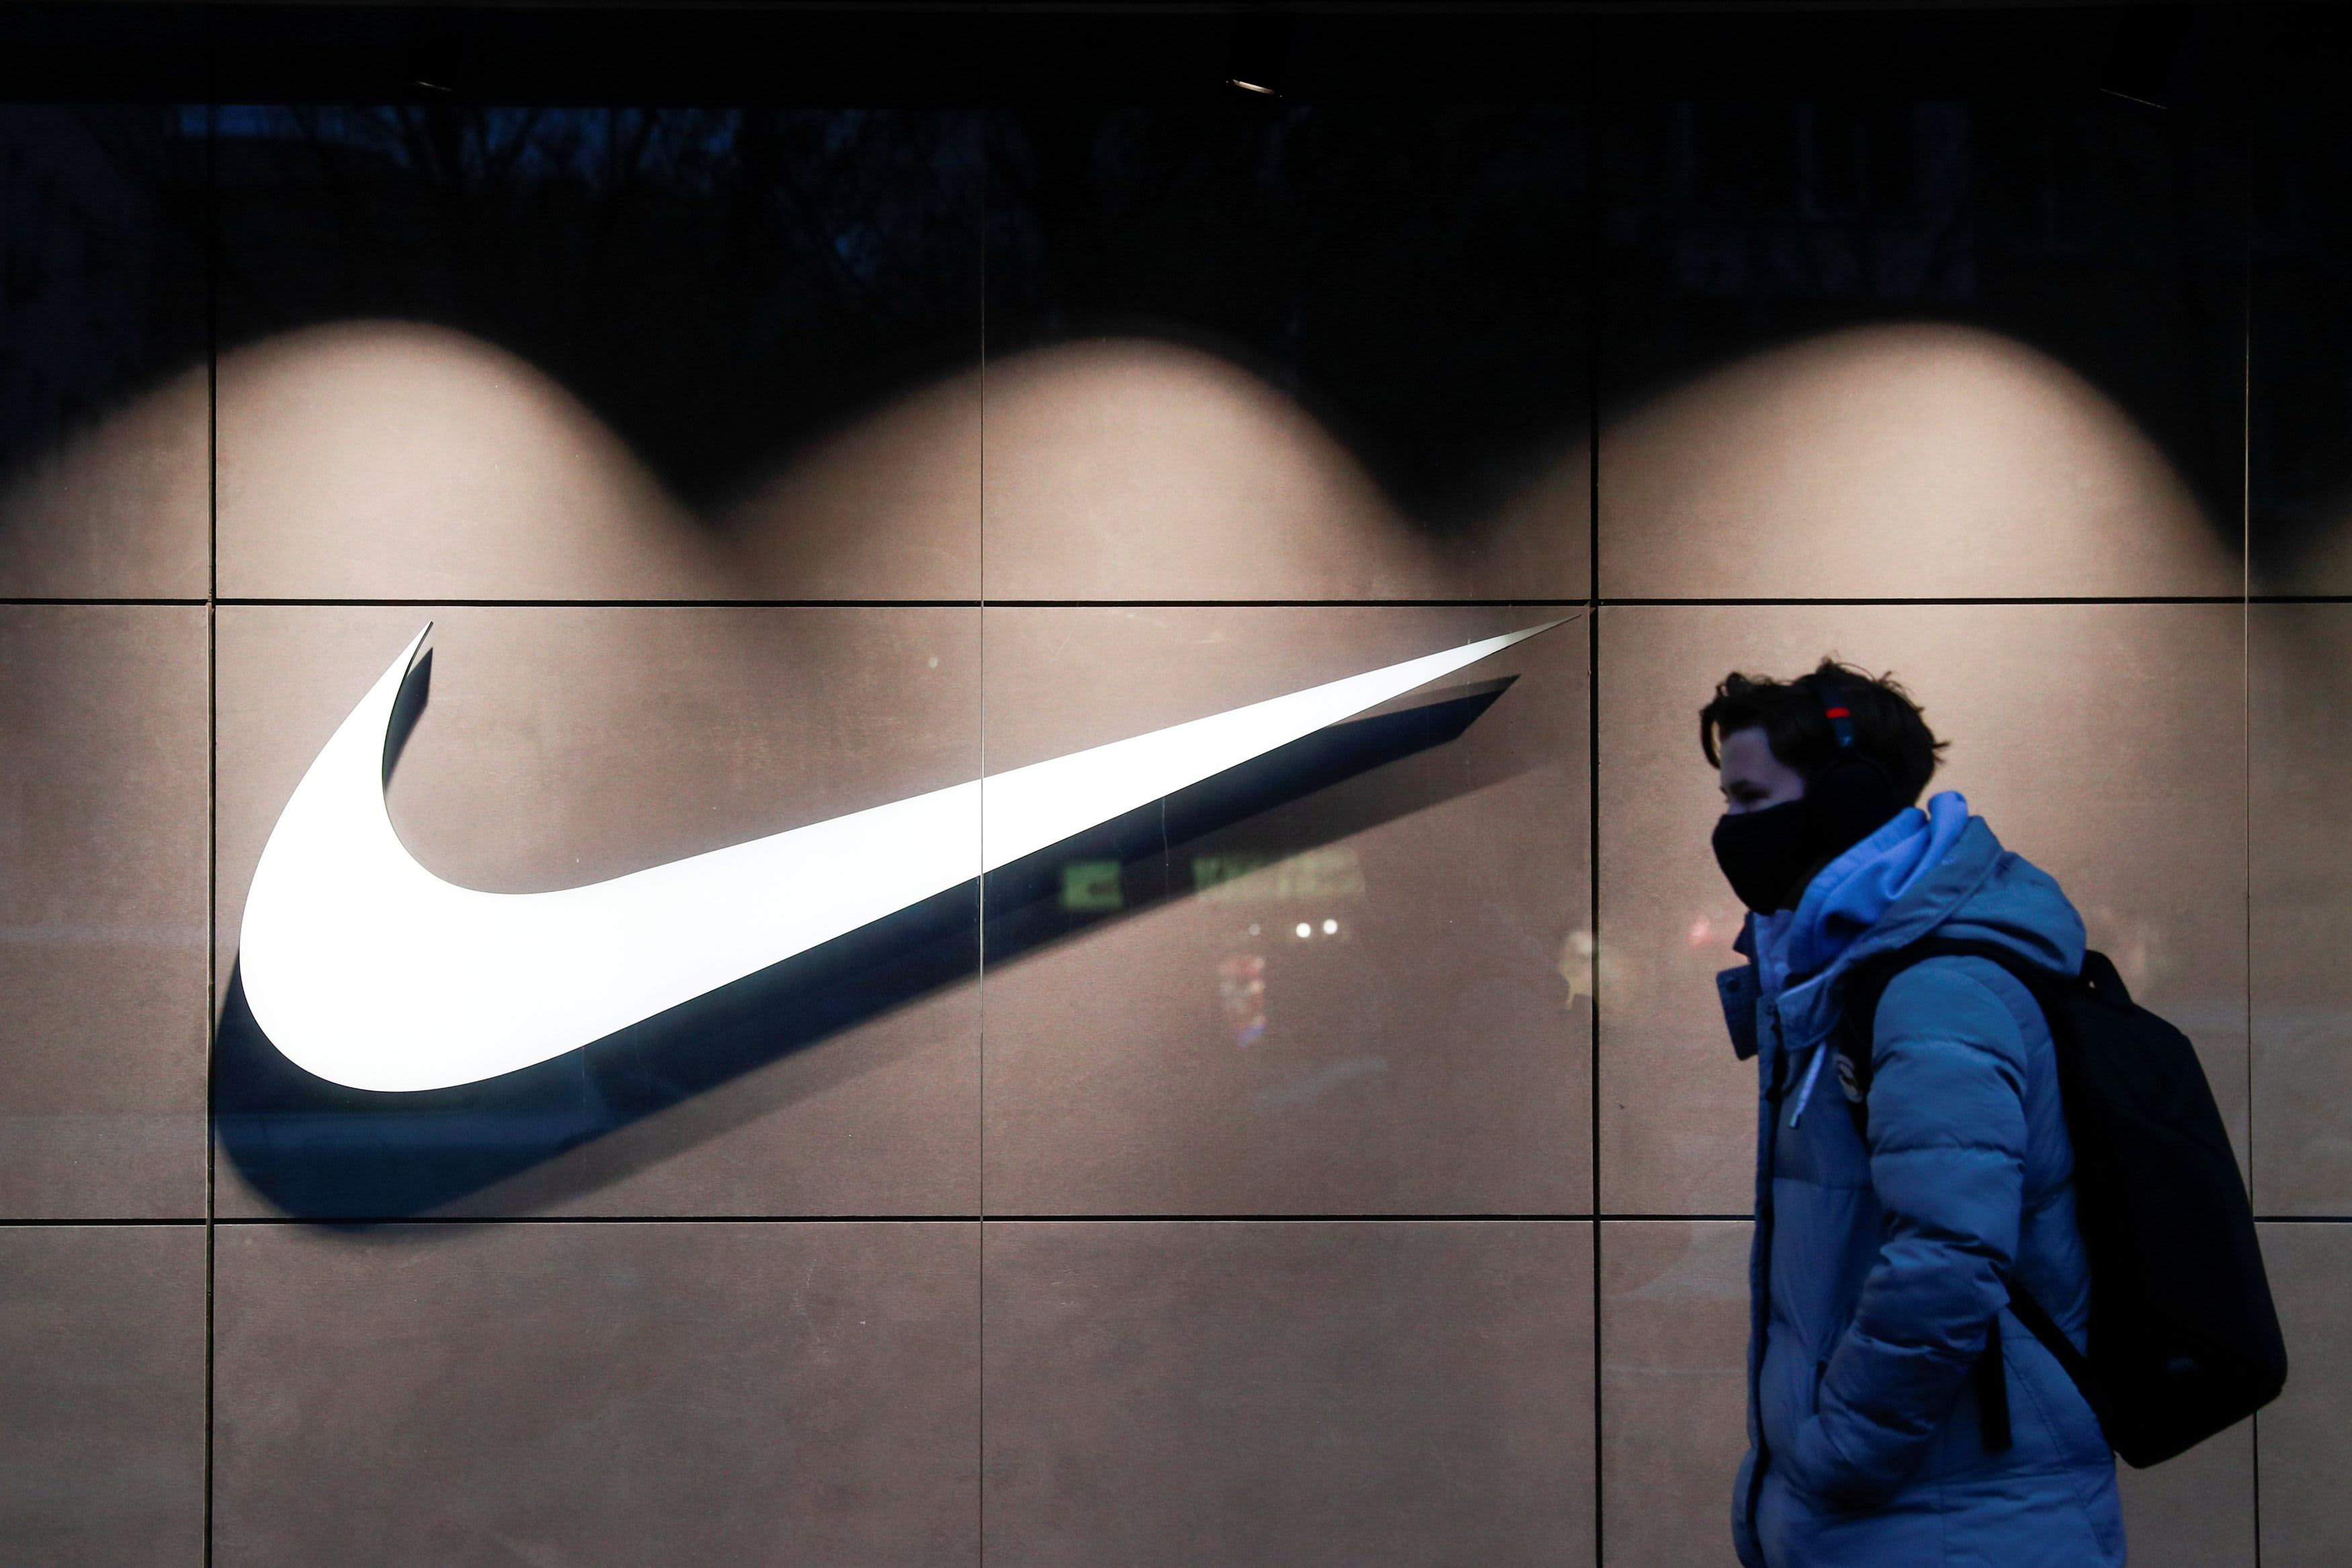 charme verf Minder Nike stock: Buy on a pullback because record highs are coming: Trader